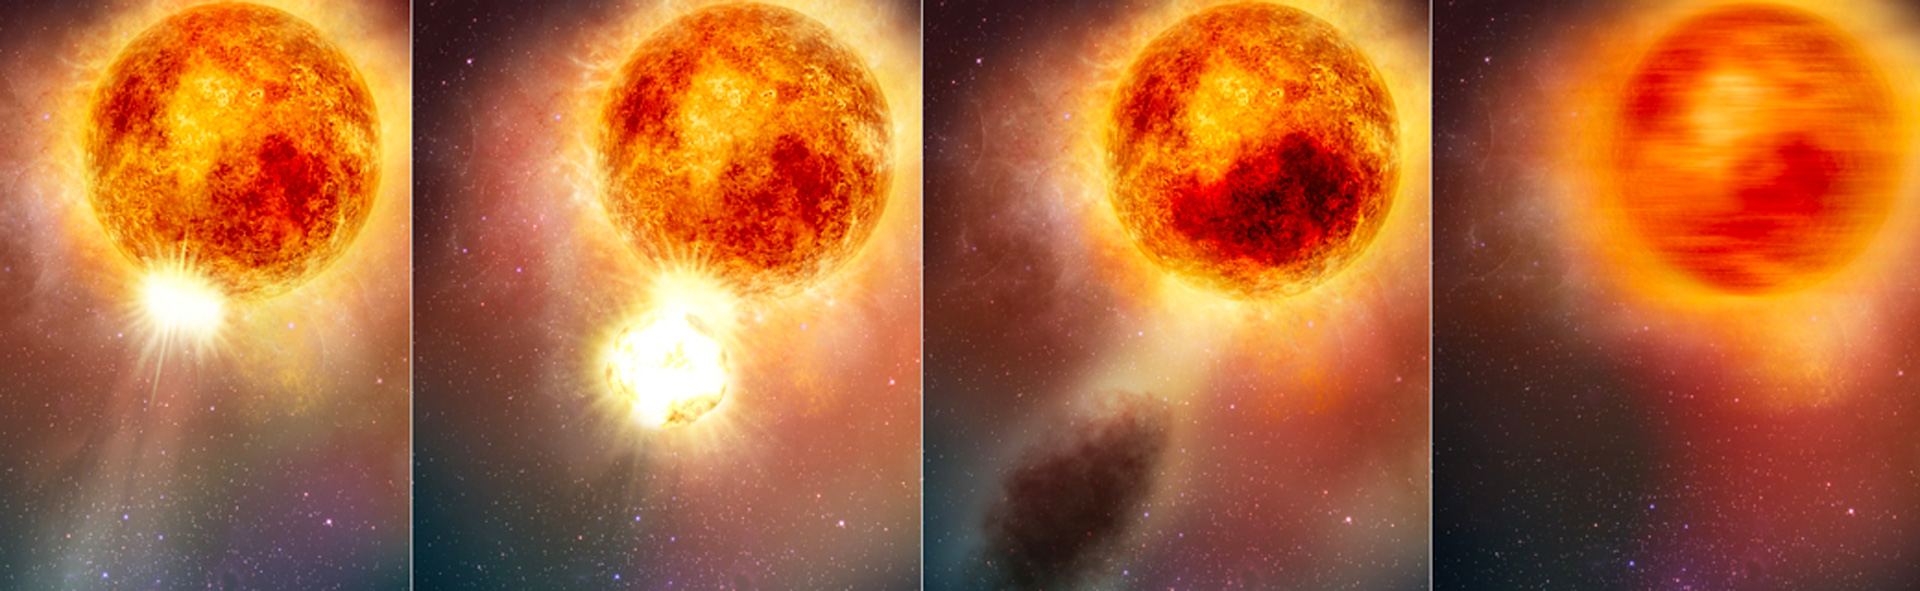 Red Supergiant Star Betelgeuse